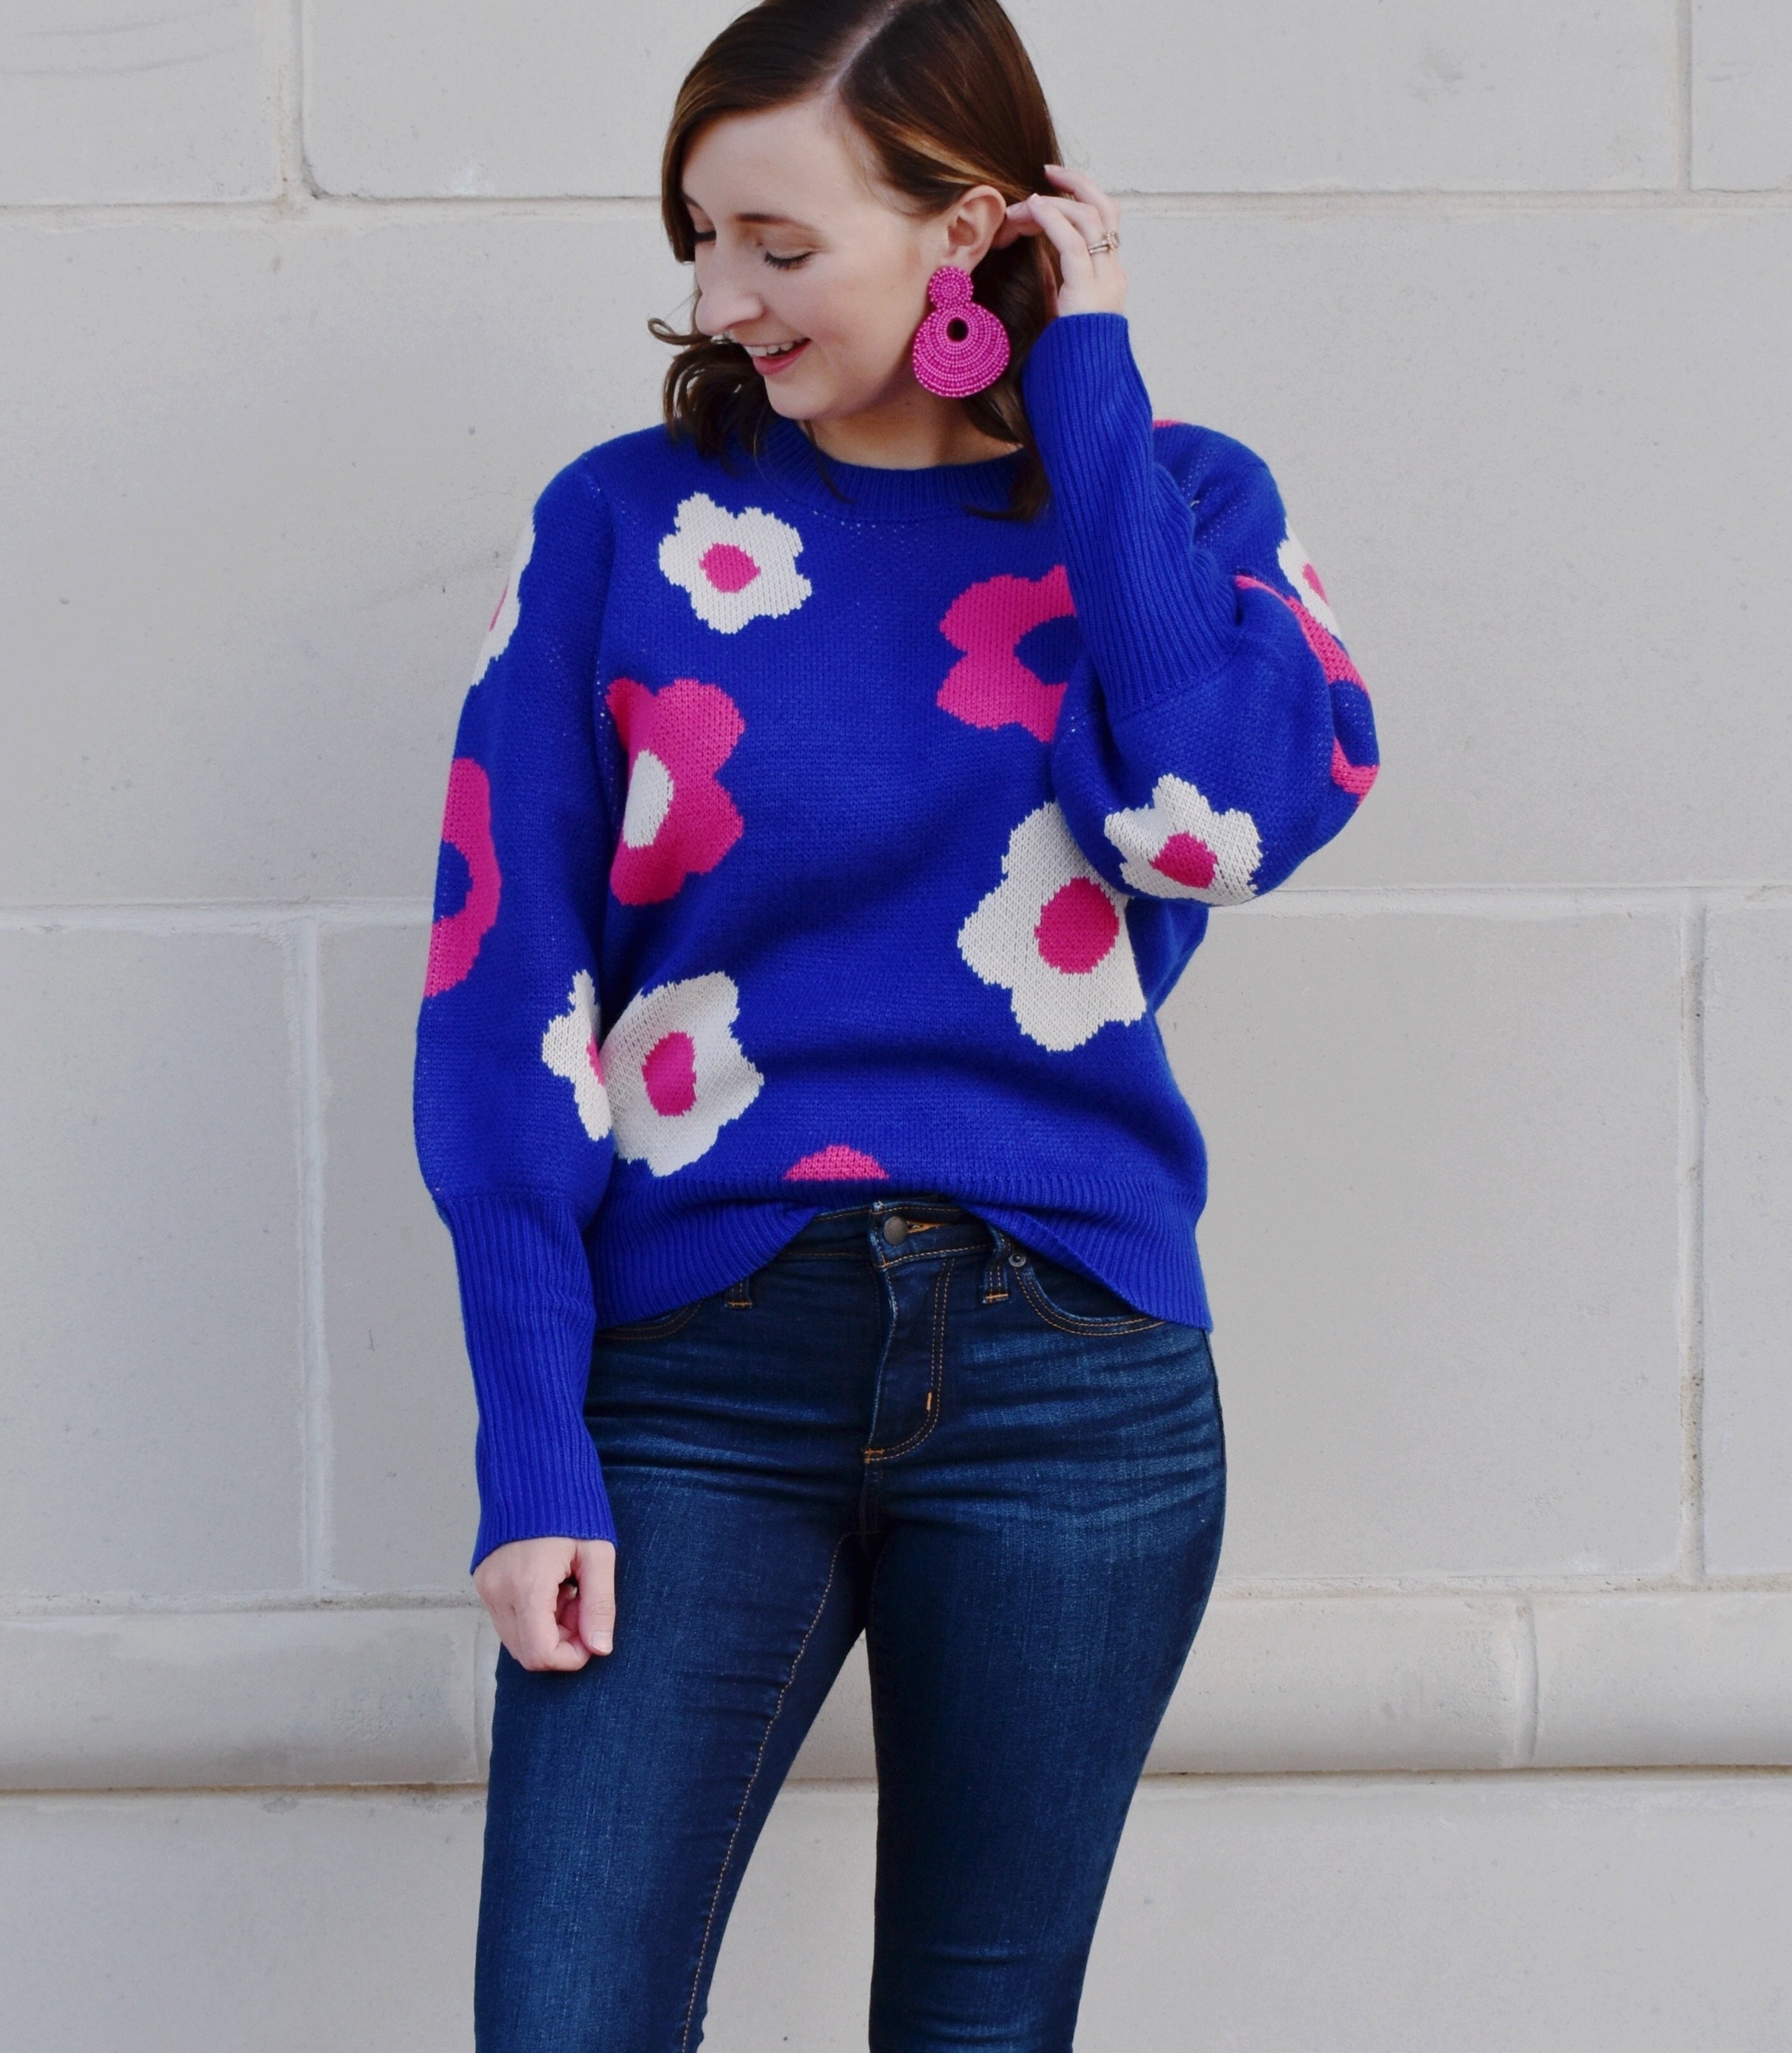 Model is wearing a bold blue sweater with pink and white retro flowers printed on it